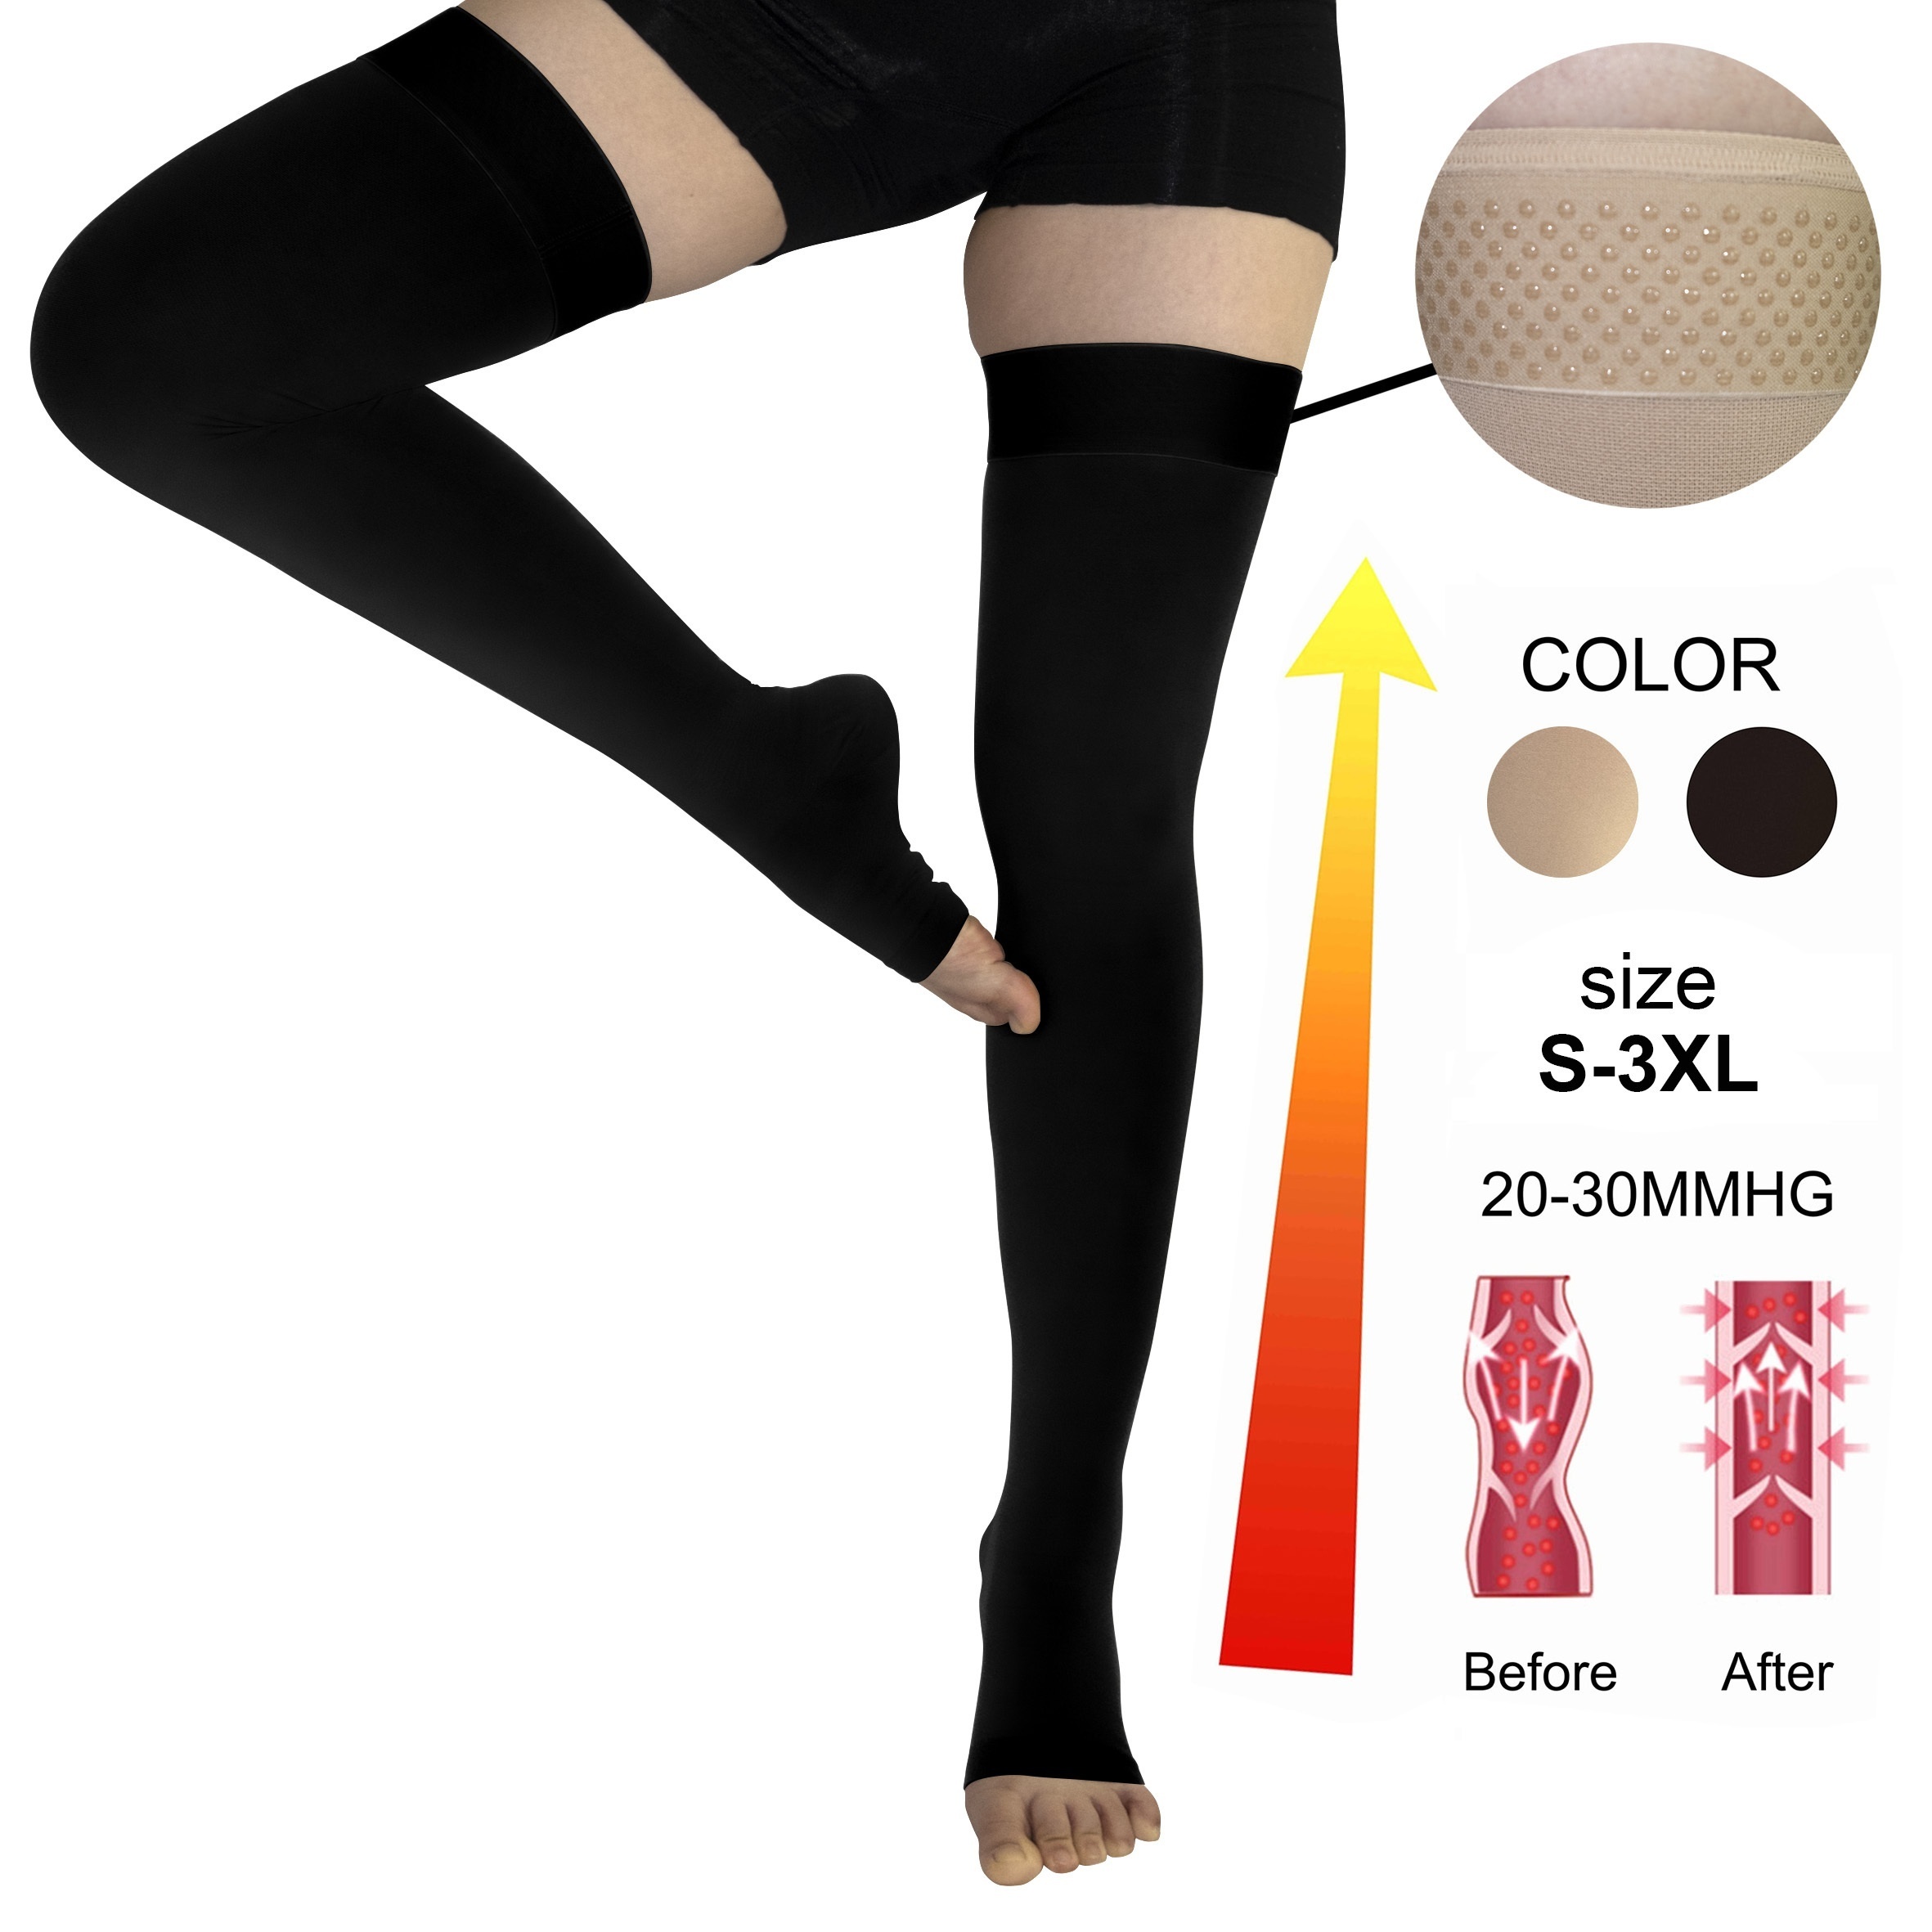 2 Pairs TED Hose Compression Stockings for Women Men Anti Embolism Knee  High15-20 Mmhg Length Stocks with Inspect Toe Hole